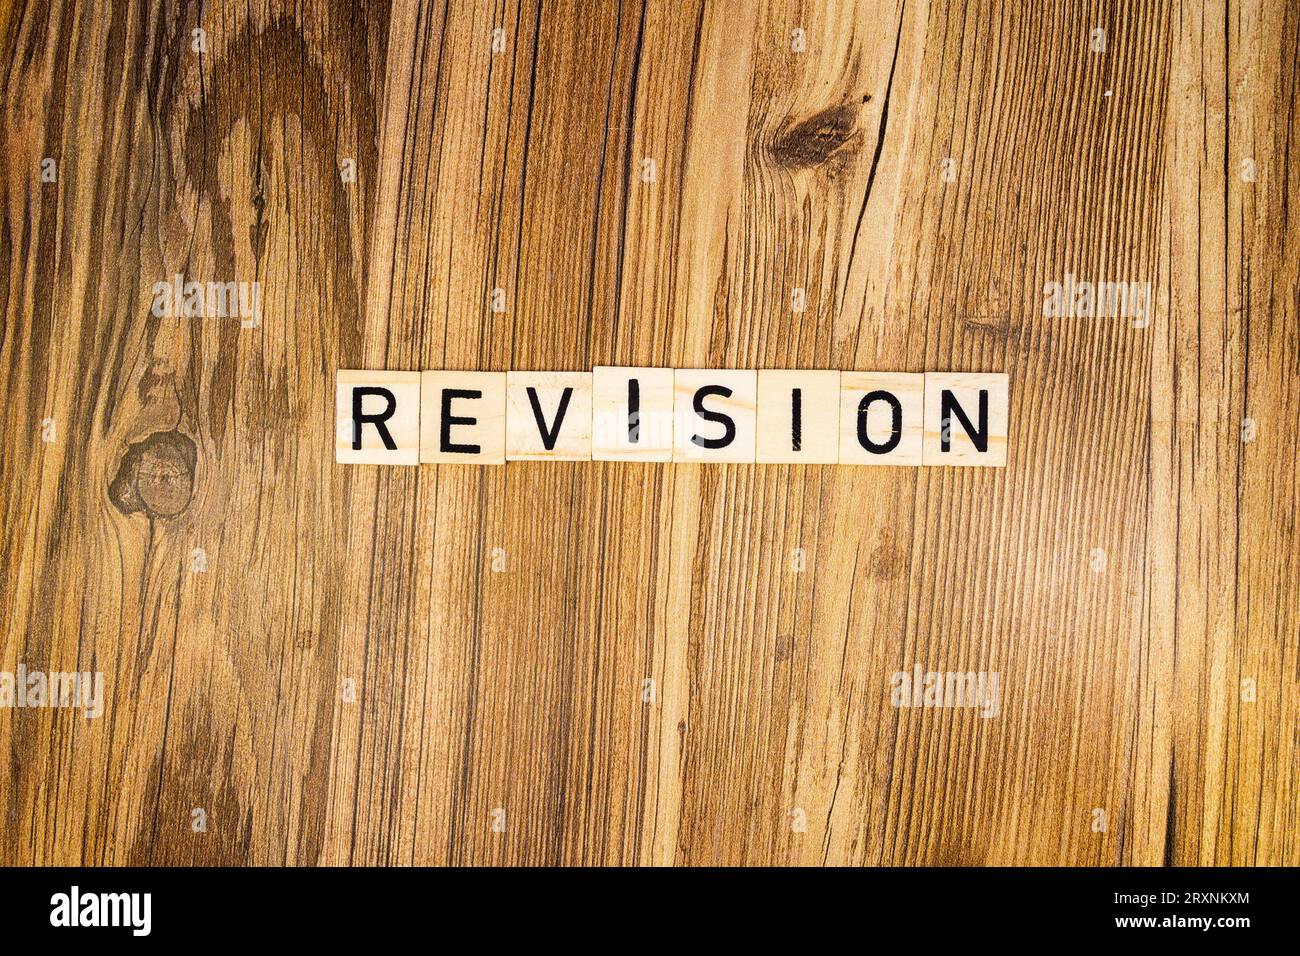 revision flat lay made of laser-engraved letters Stock Photo